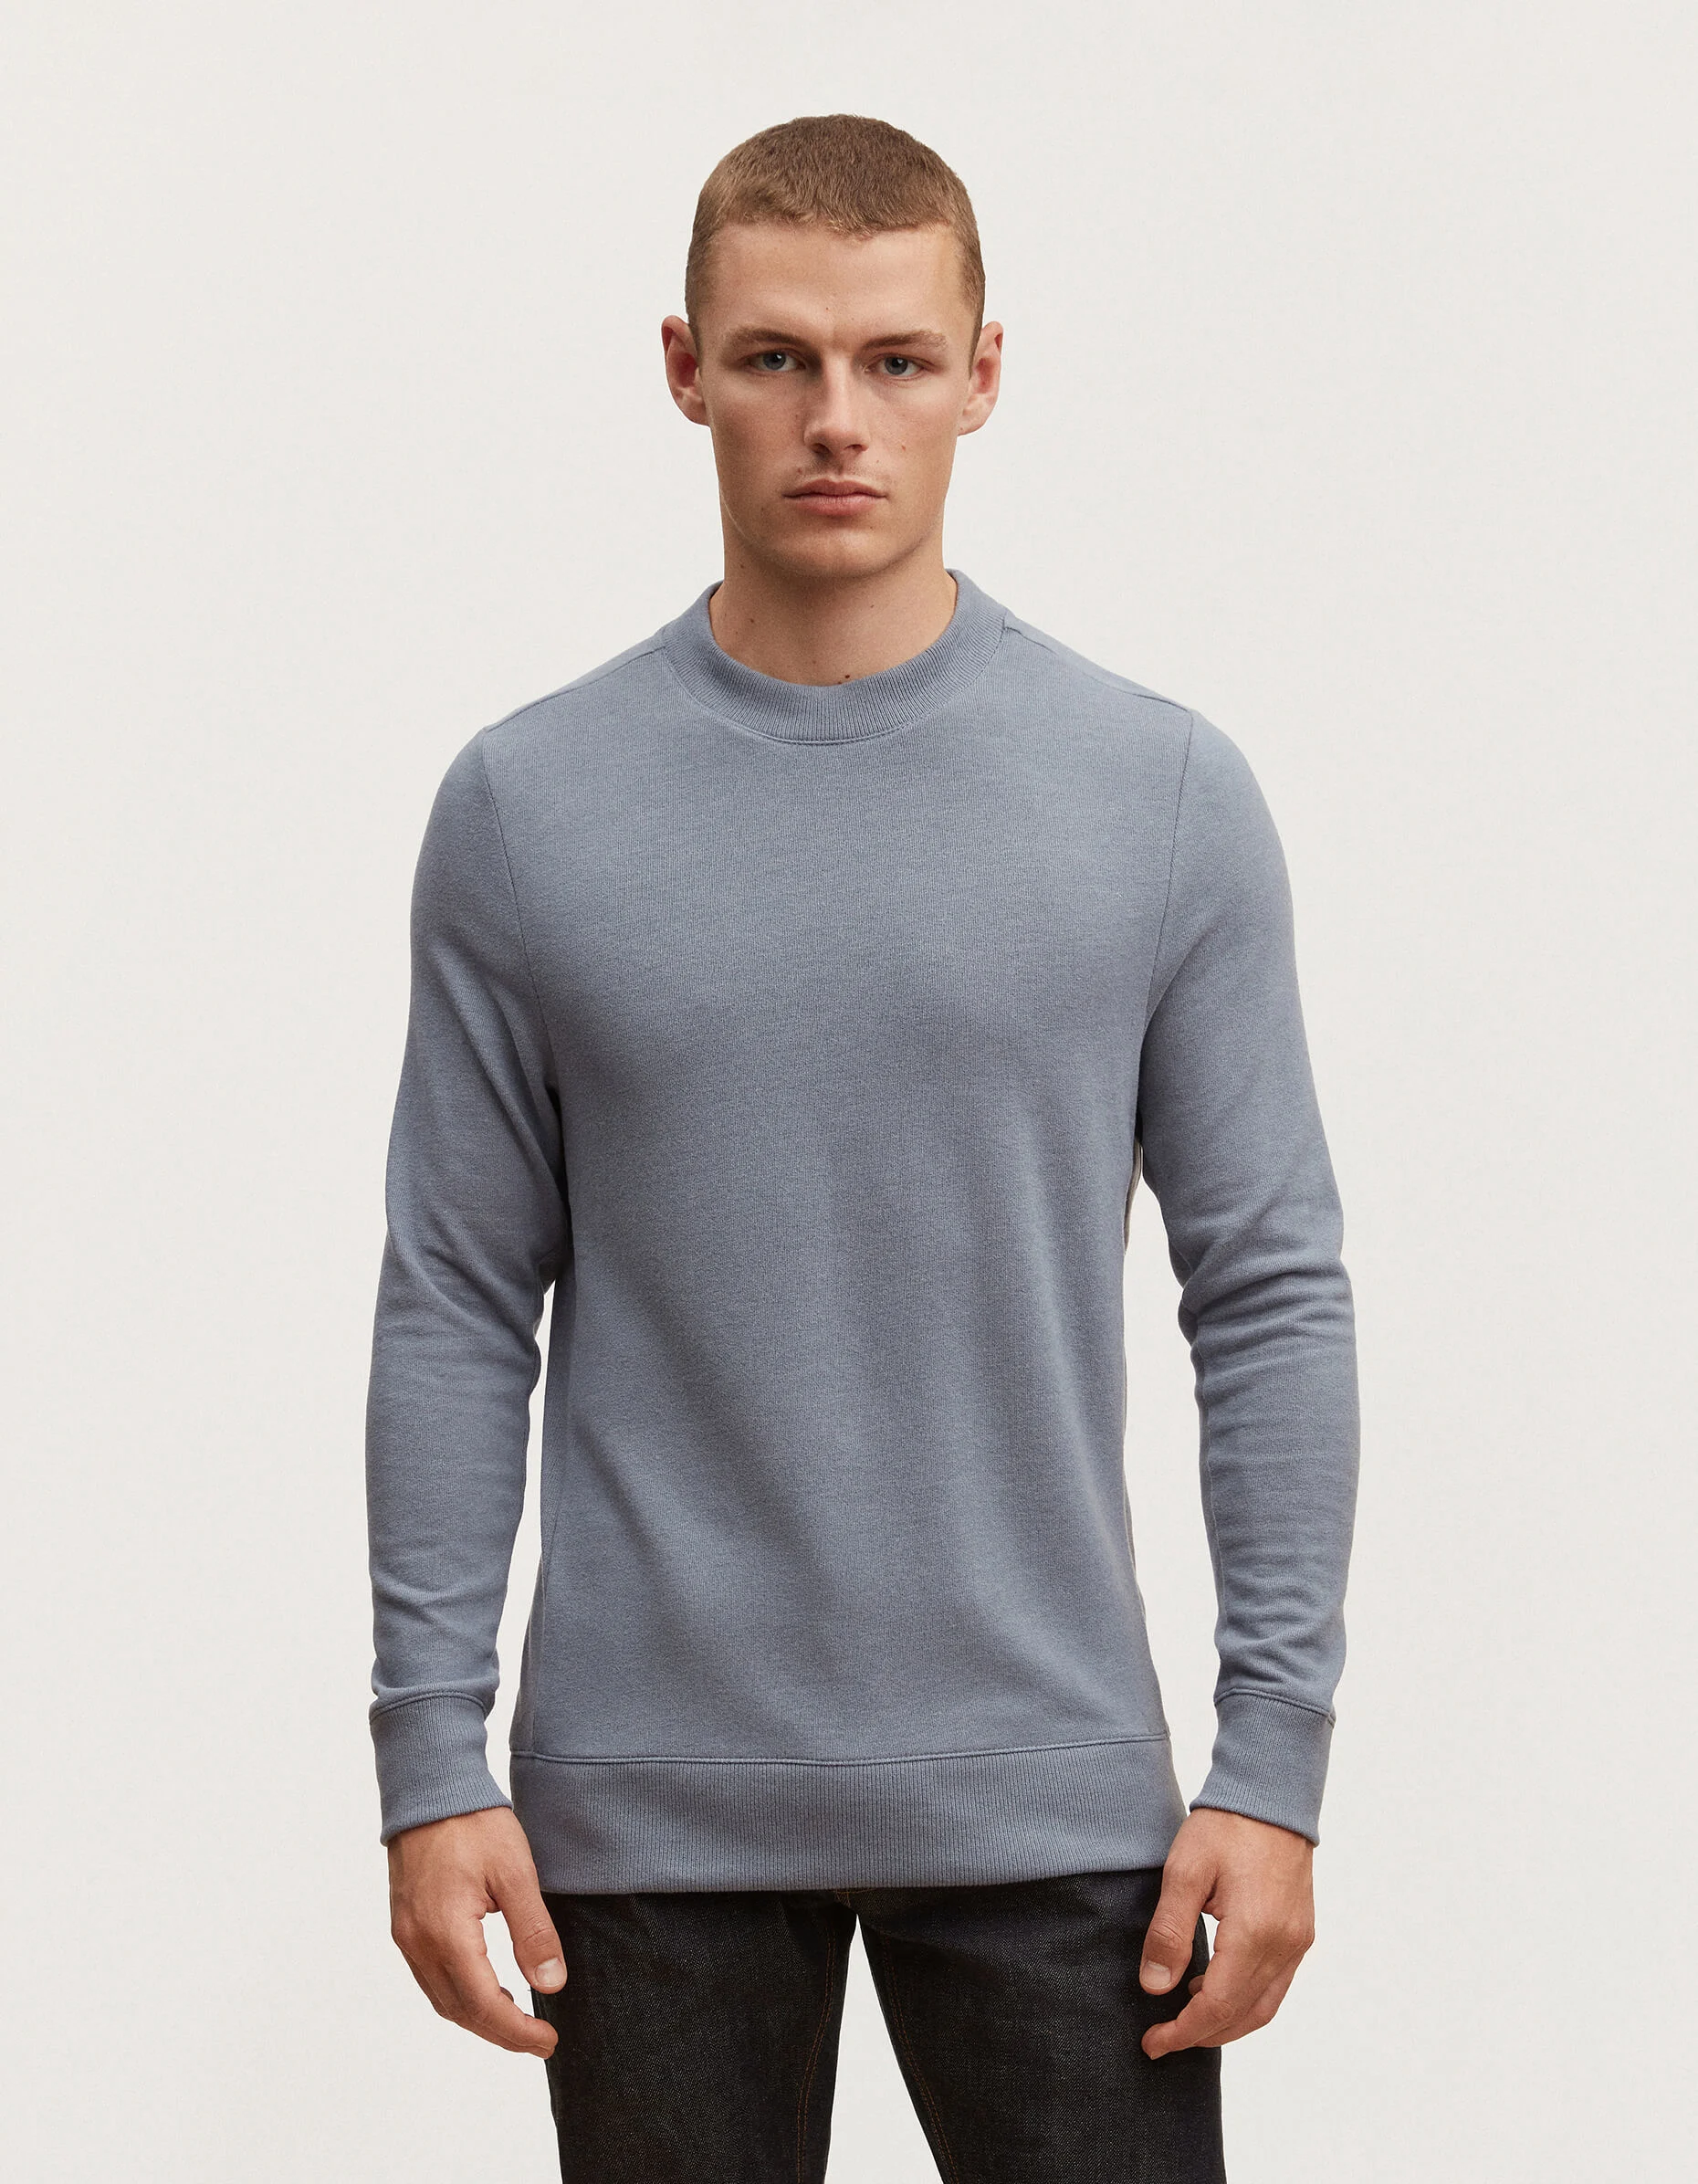 ROGER CREW NECK SWEATER Cotton Jersey